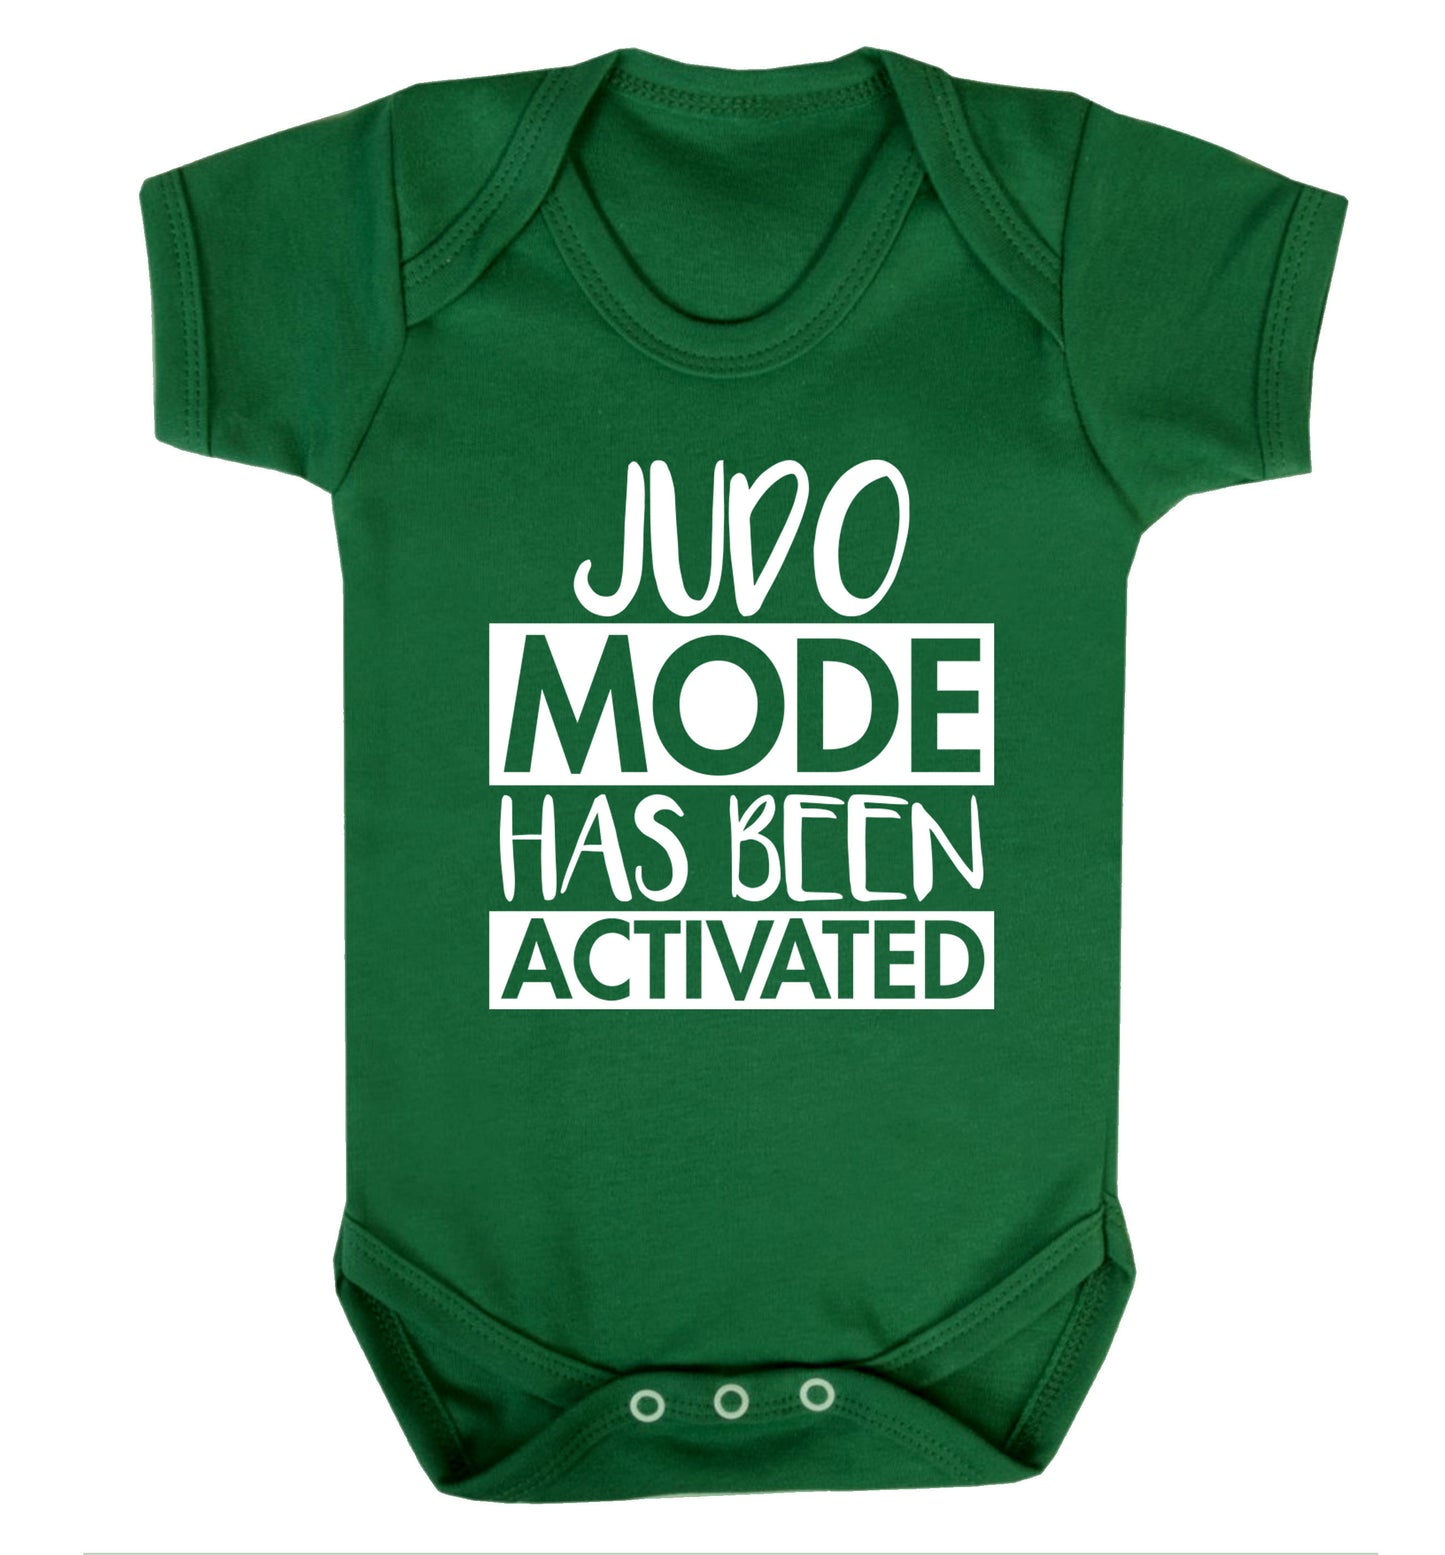 Judo mode activated Baby Vest green 18-24 months